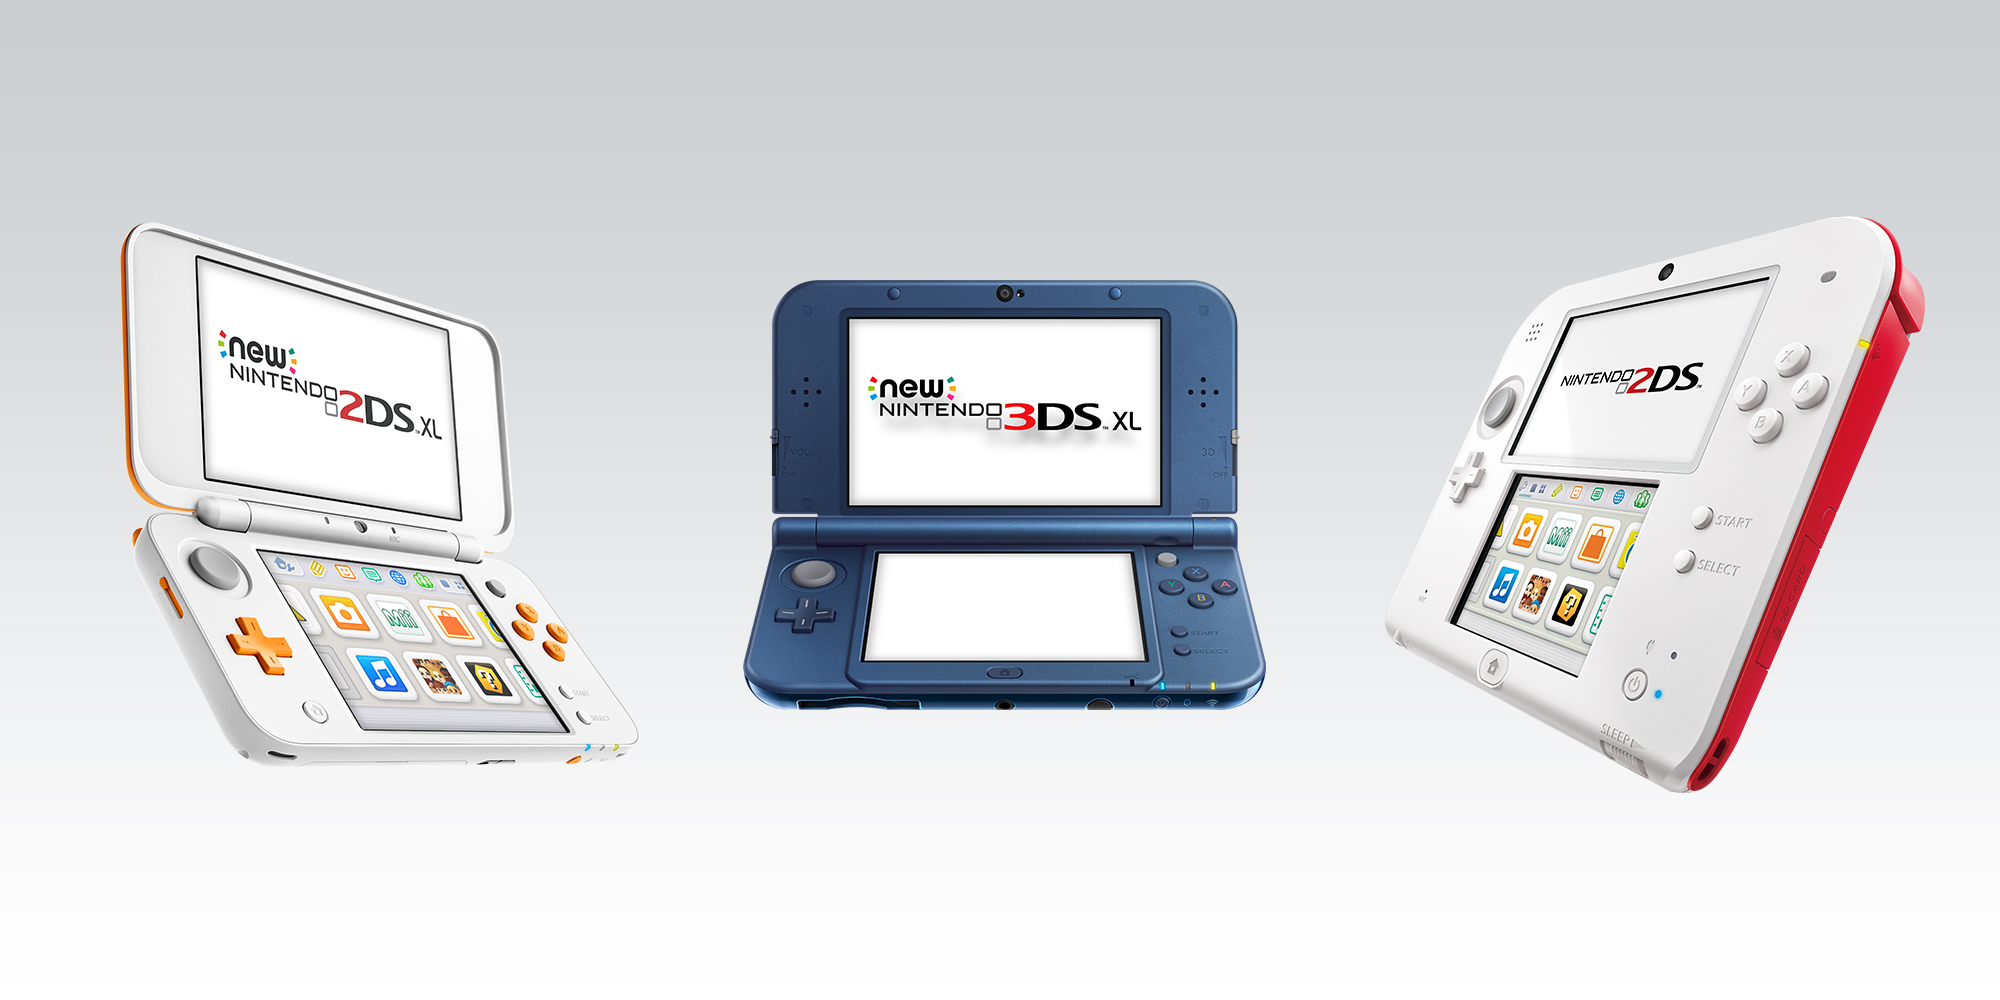 nintendo 3ds year it came out